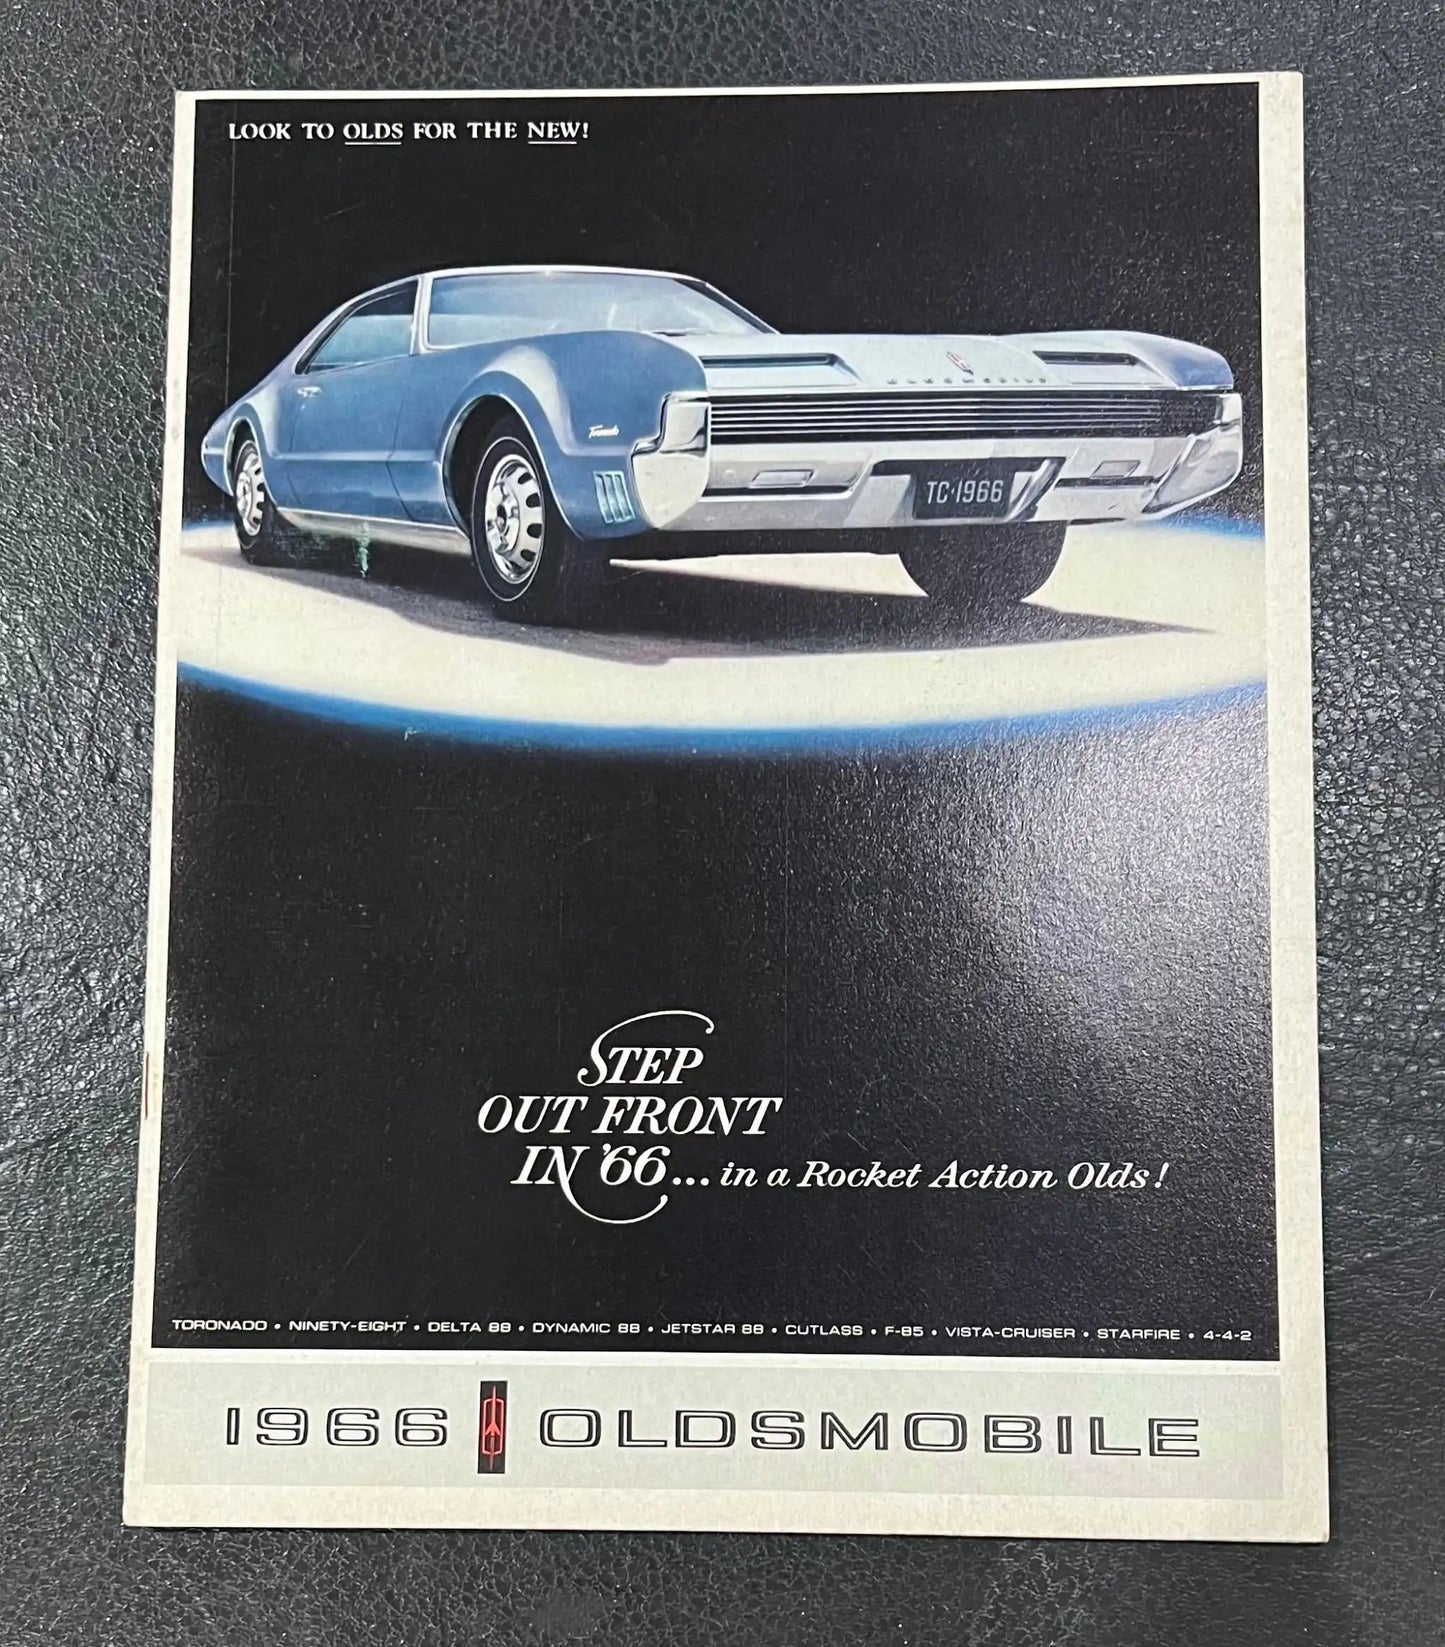 1966 Original Oldsmobile Tornado Starfire 442 98 88s Cutlass Brochure Relic has been safely stored away for decades and is in very good new old stock condition